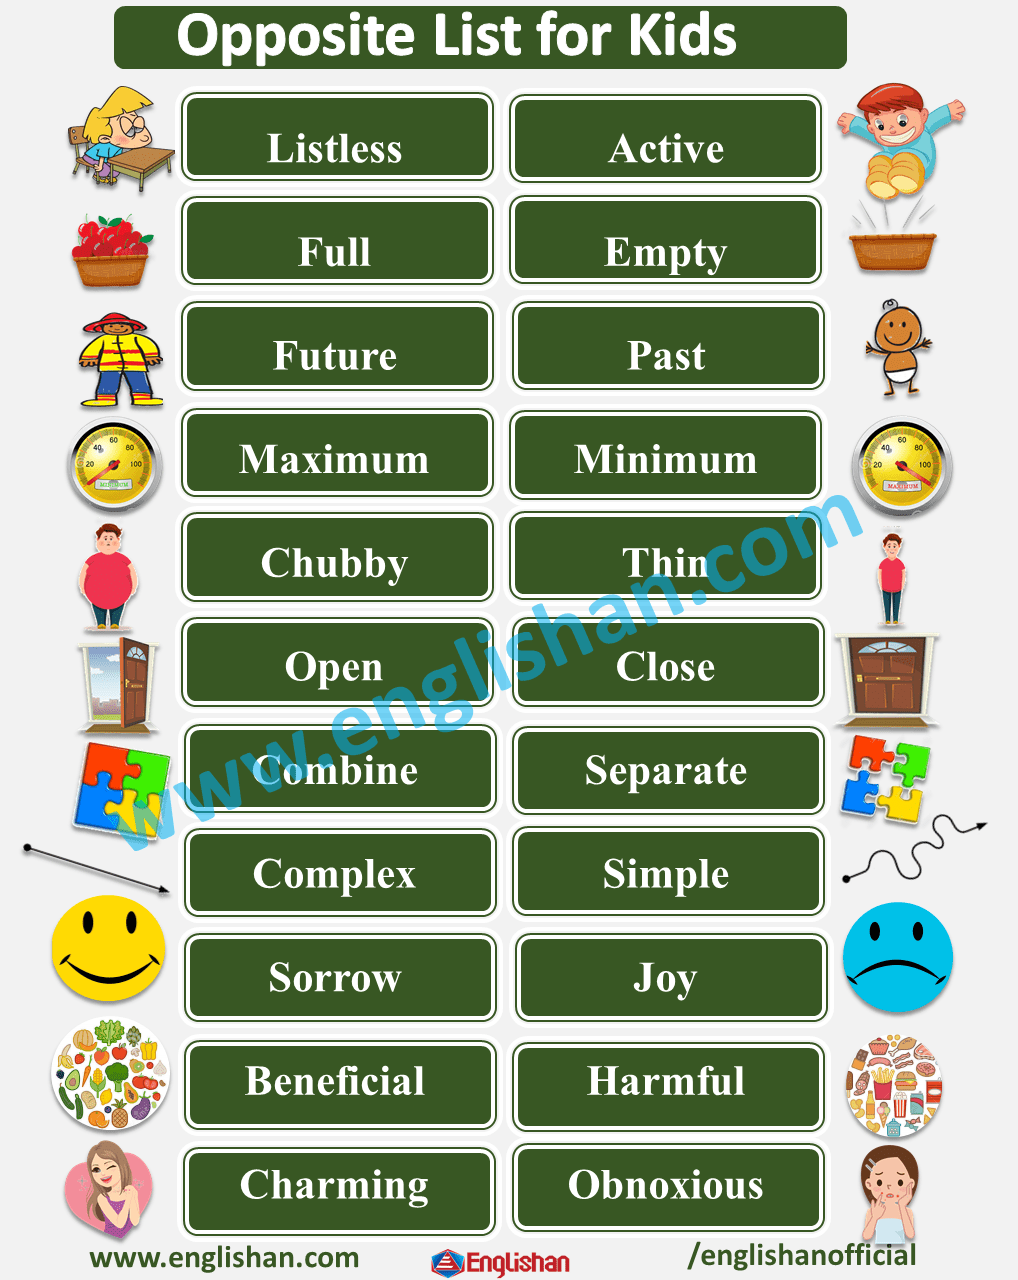 opposite words with pictures for kids